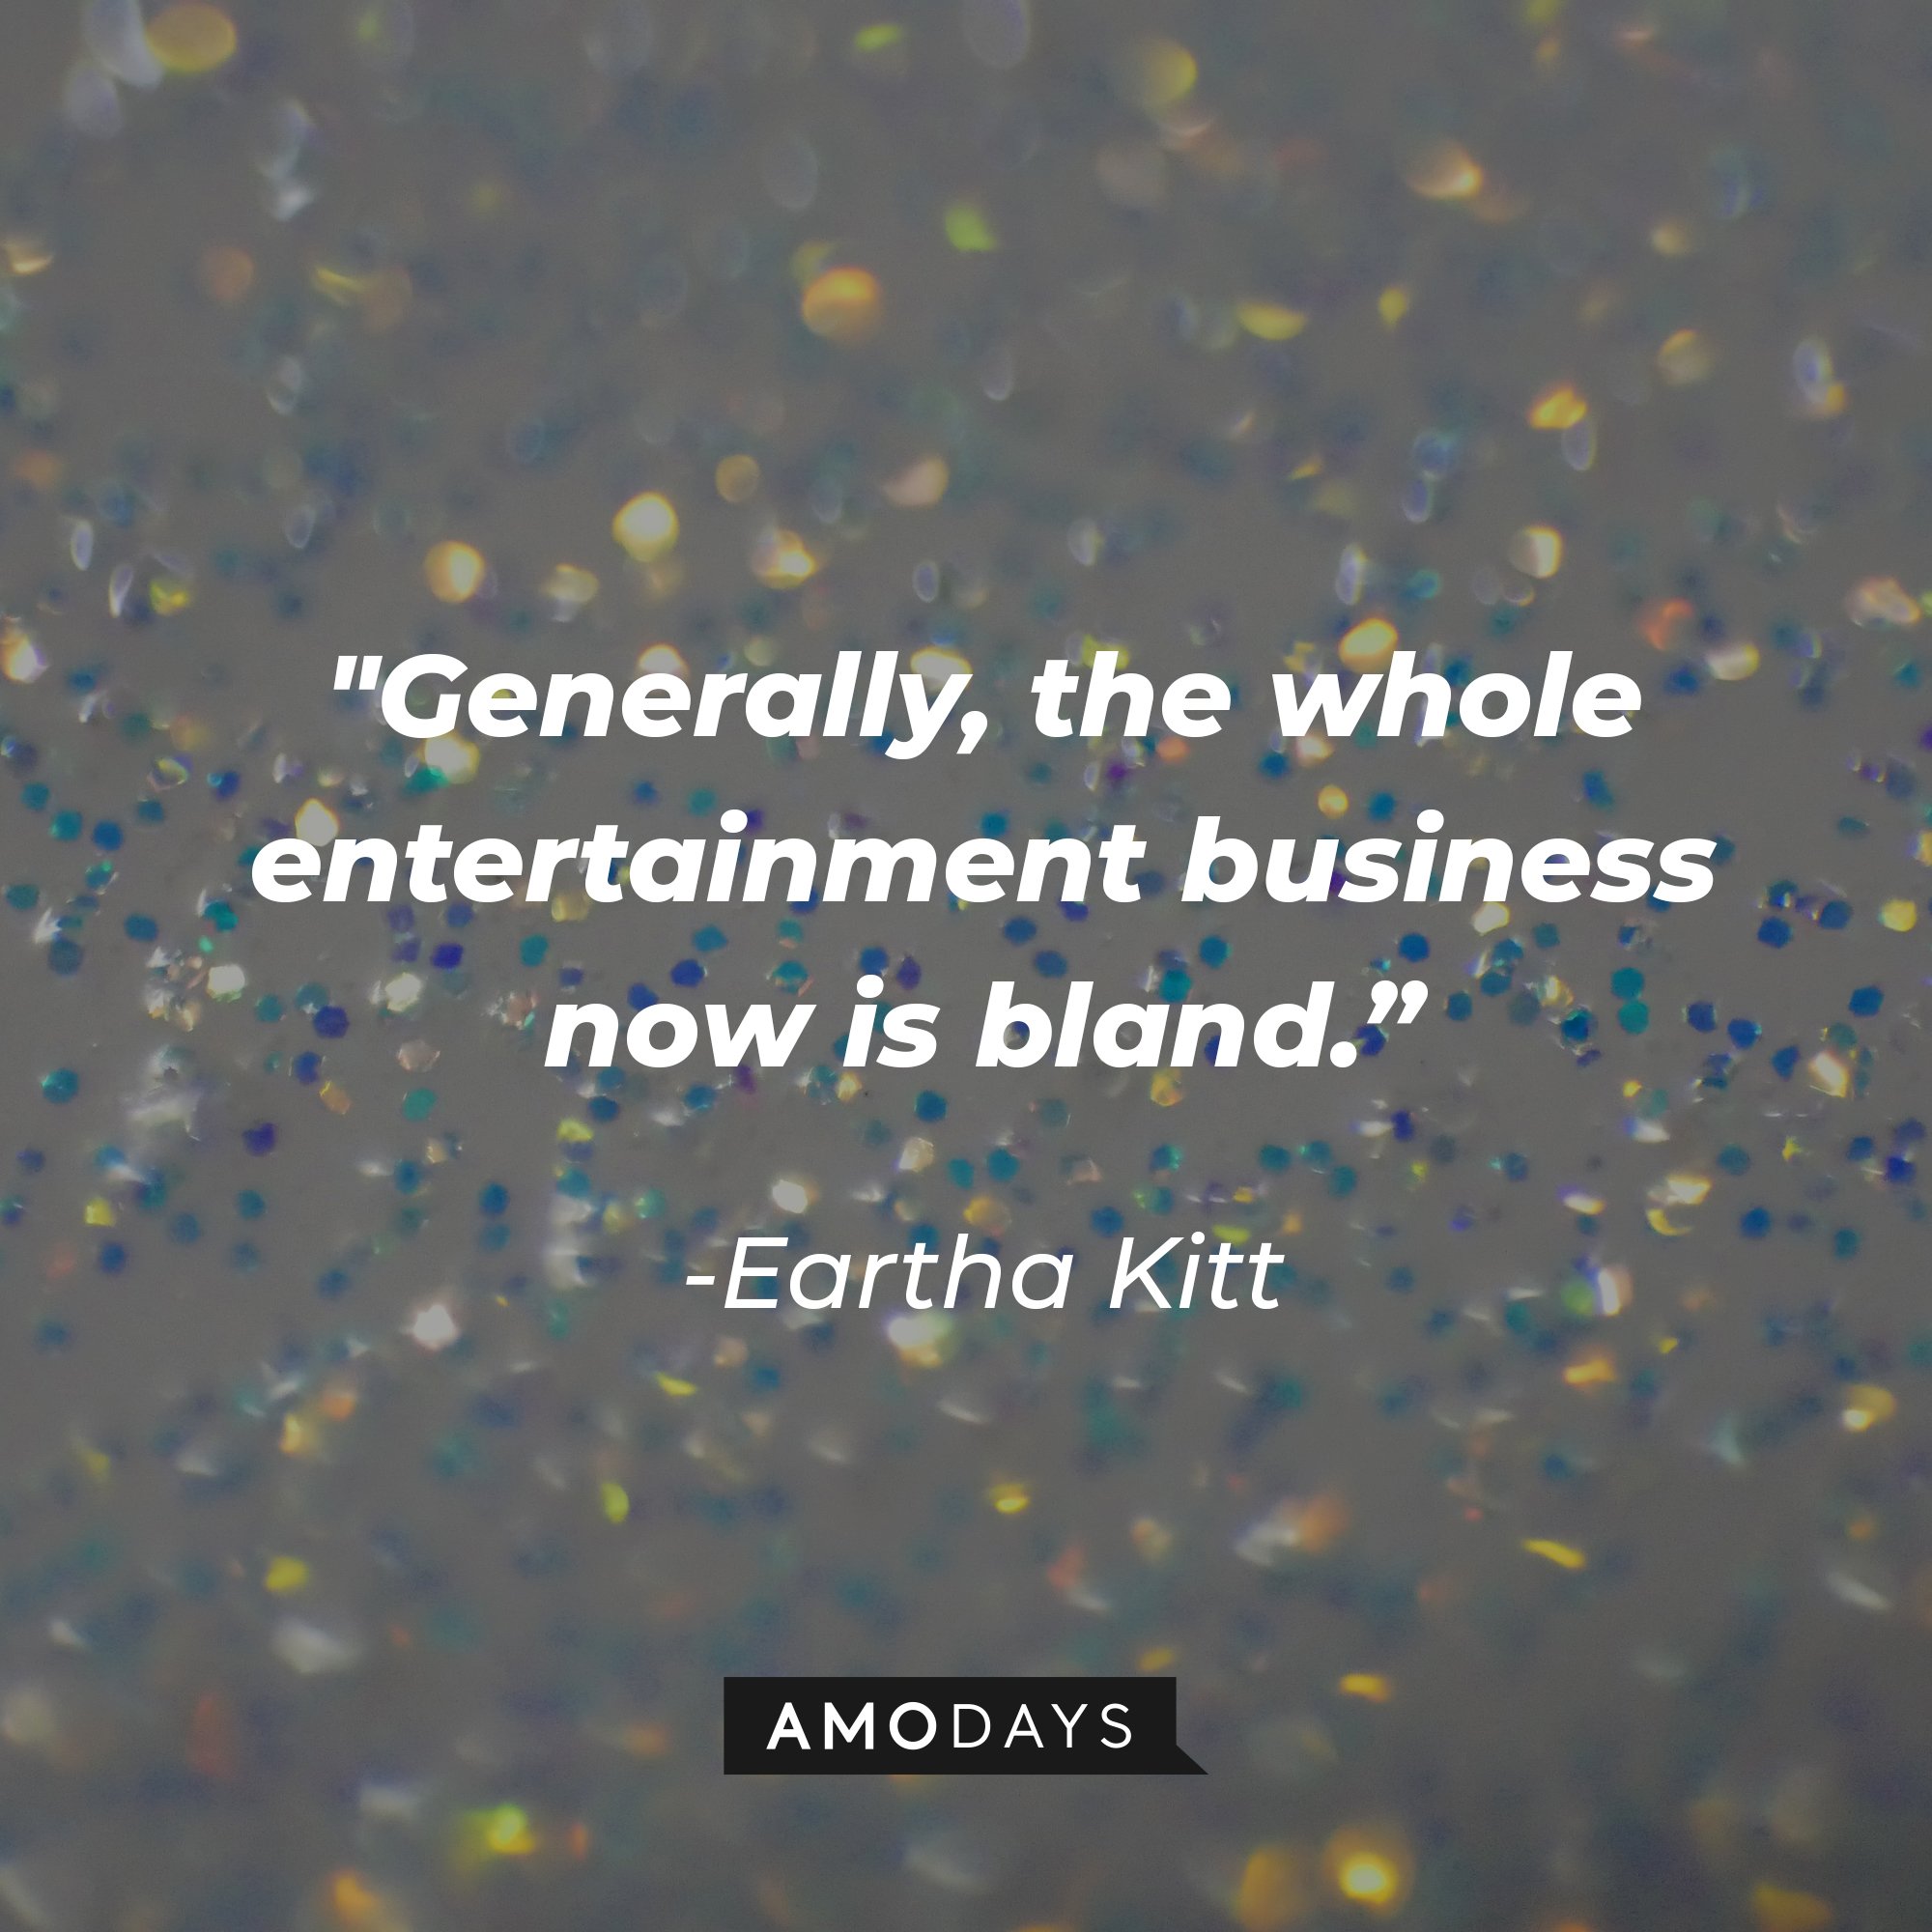 Eartha Kitt’s quote: "Generally, the whole entertainment business now is bland."  | Image: AmoDays